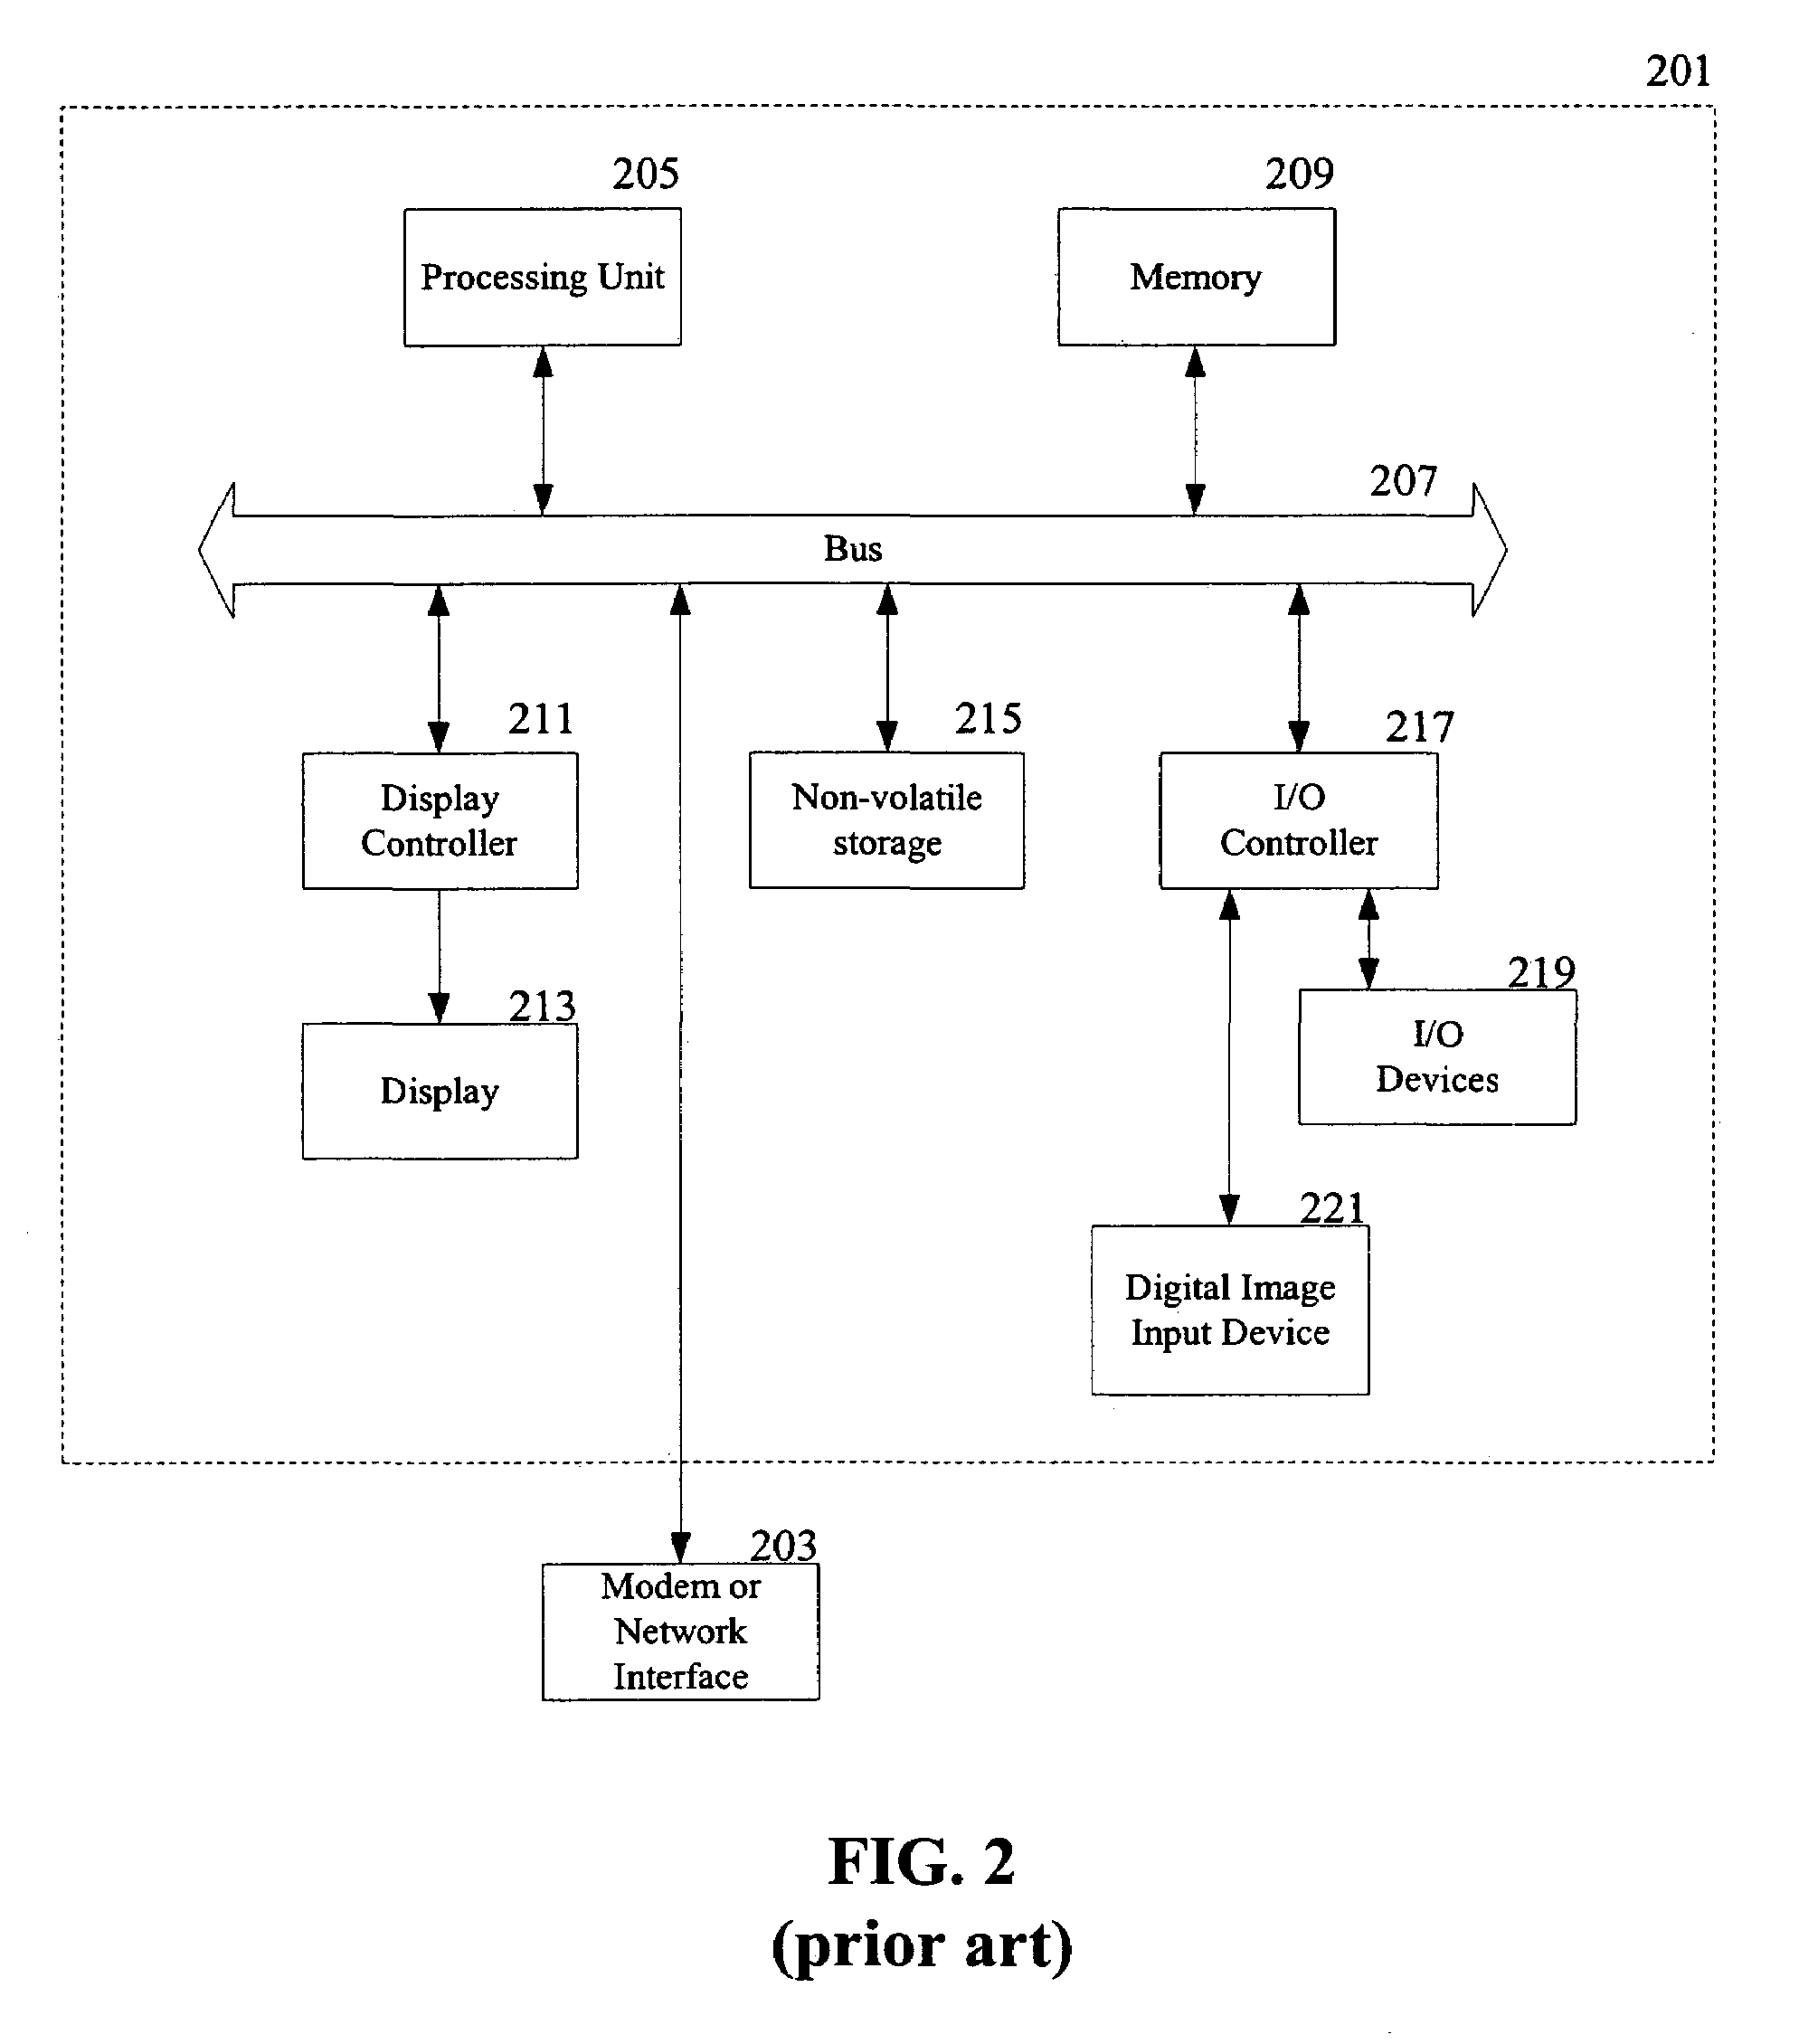 Multi-layer protocol reassembly that operates independently of underlying protocols, and resulting vector list corresponding thereto